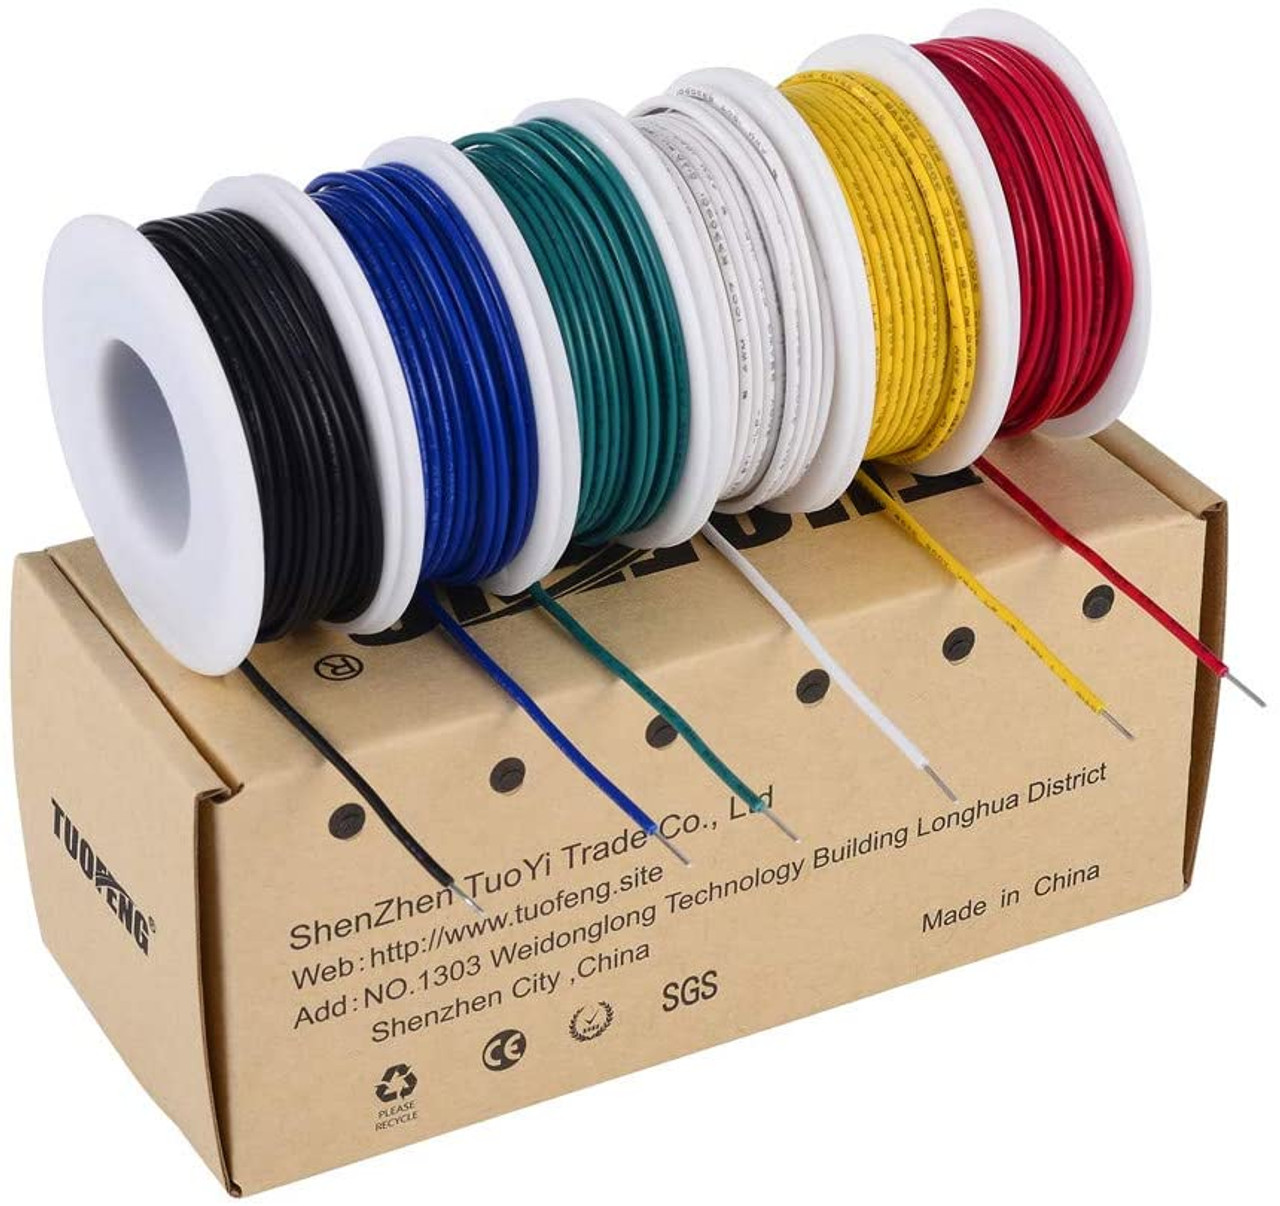 22 awg Solid Wire-Solid Wire Kit-6 different colored 30 Feet